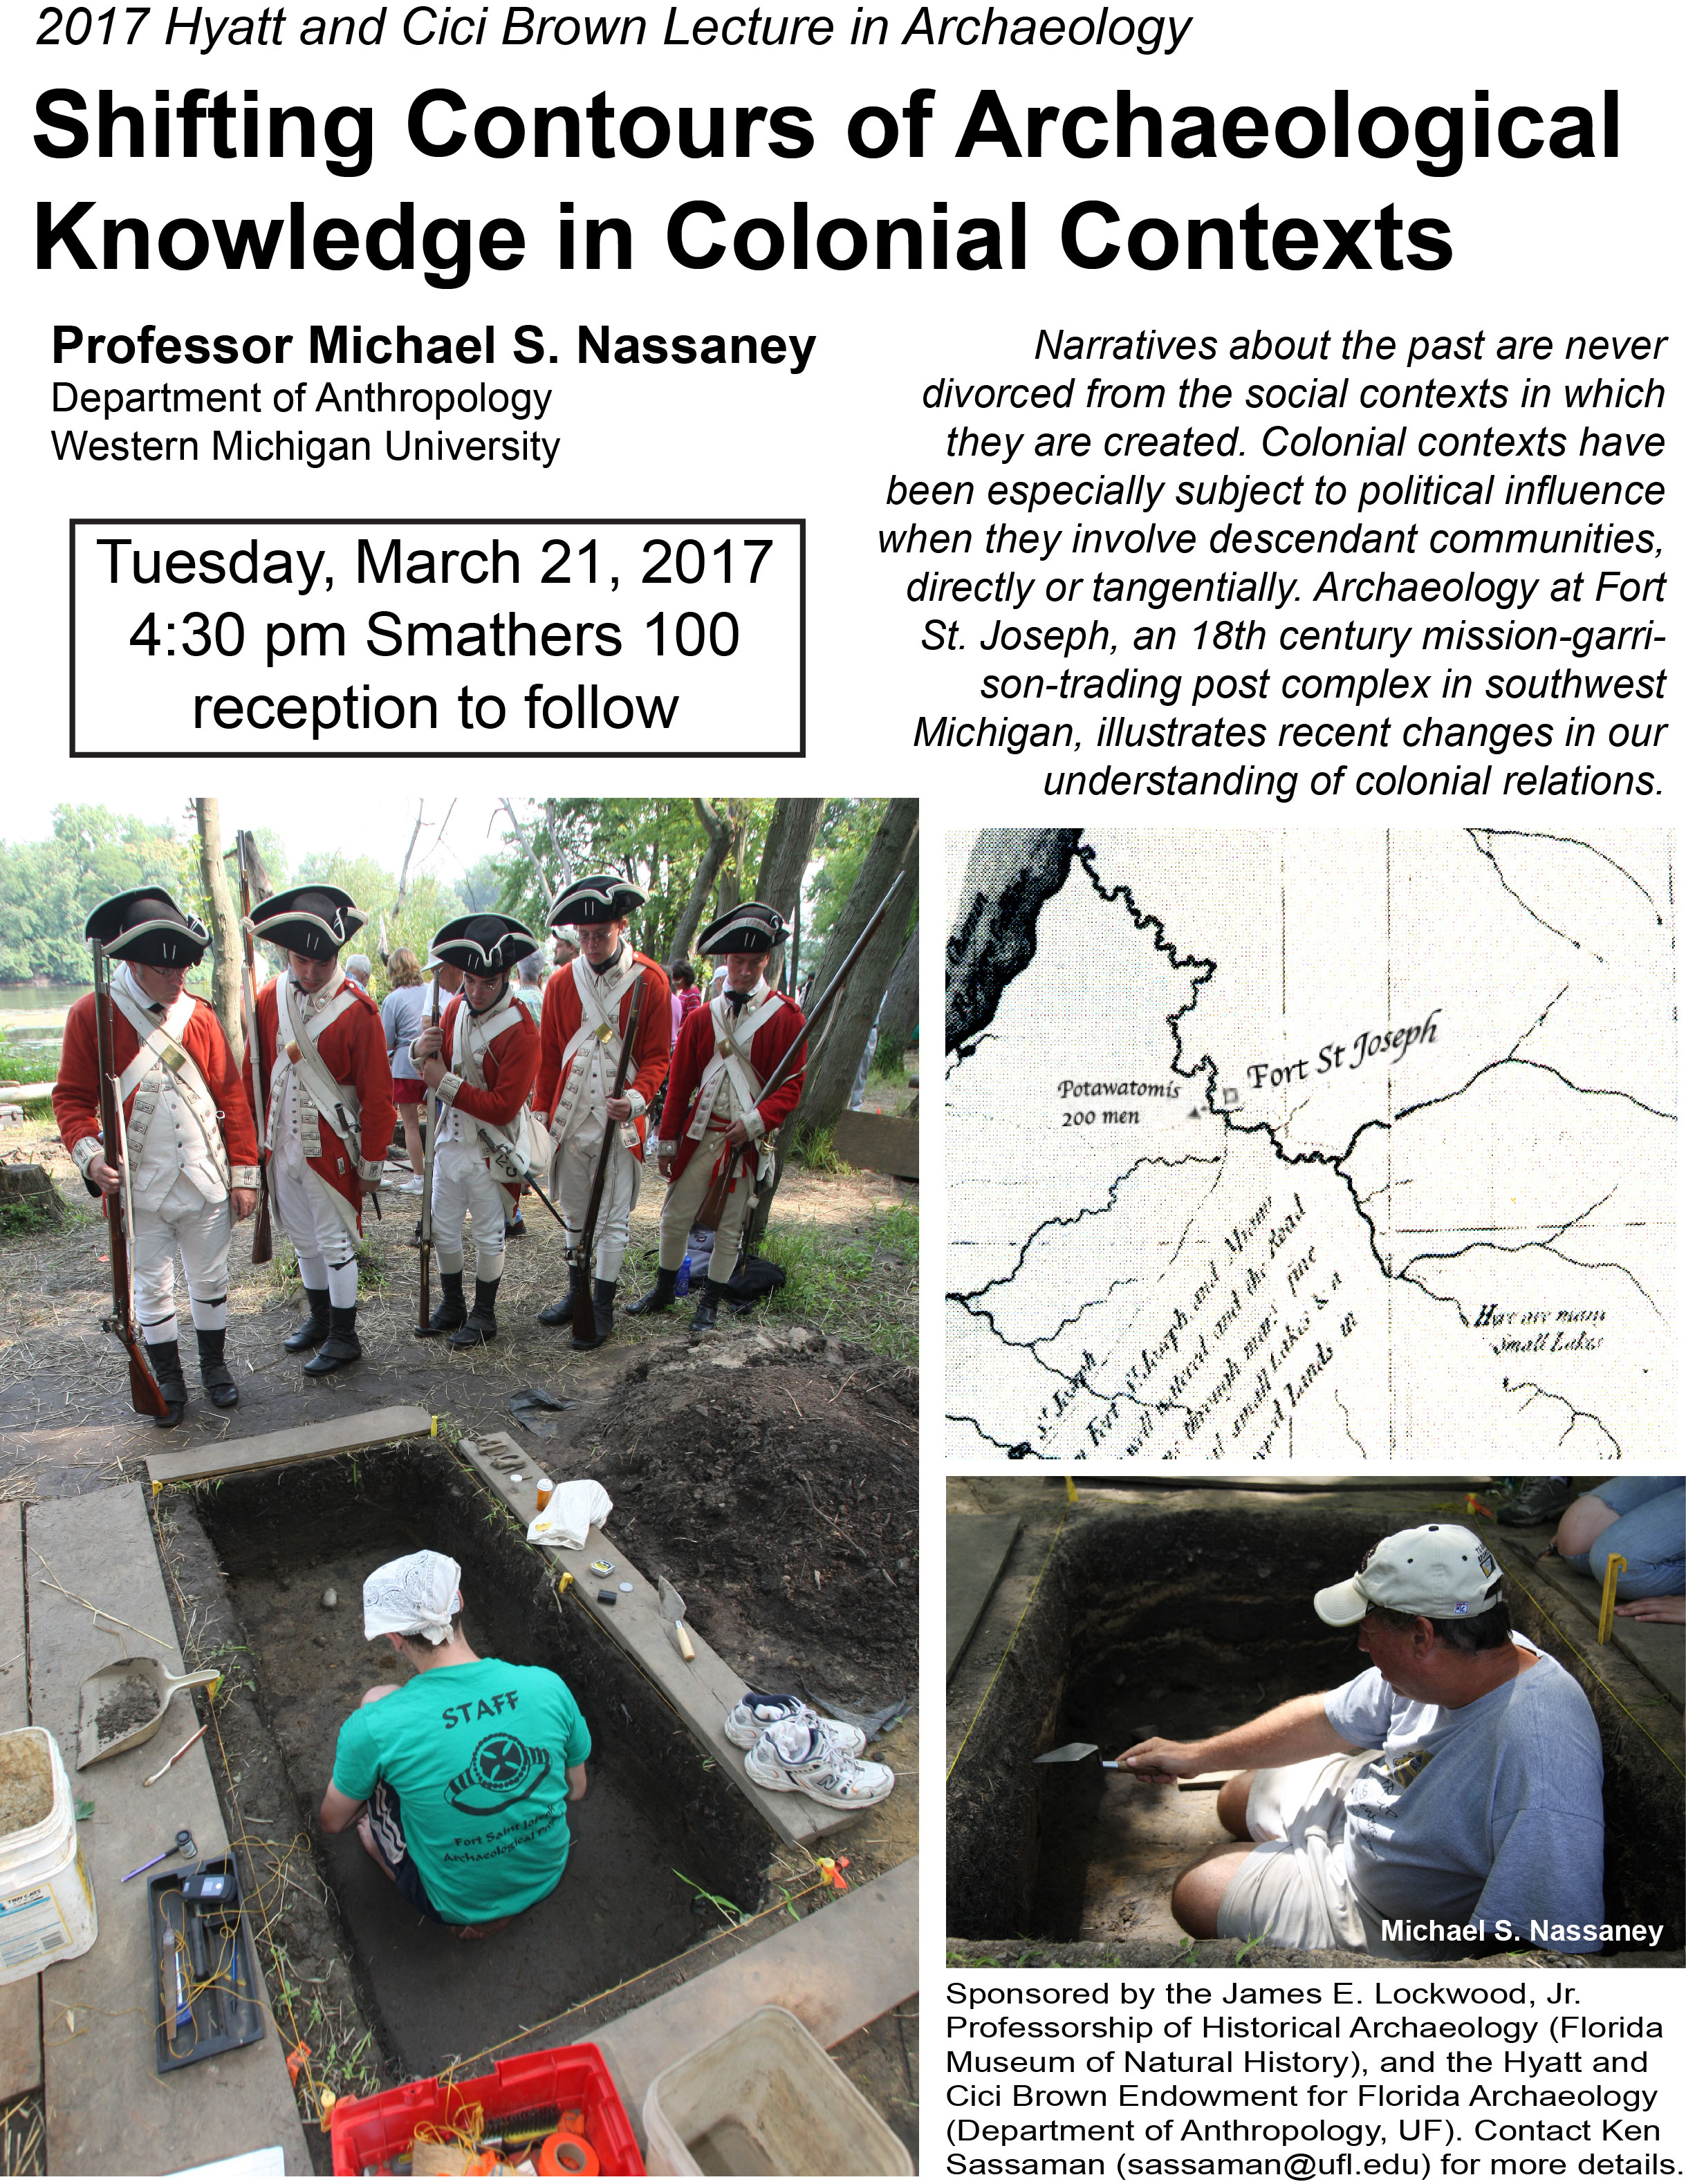 Photo of information for Professor Michael S. Nassaney's lecture on Shifting Contours of Archaeological Knowledge in Colonial Context